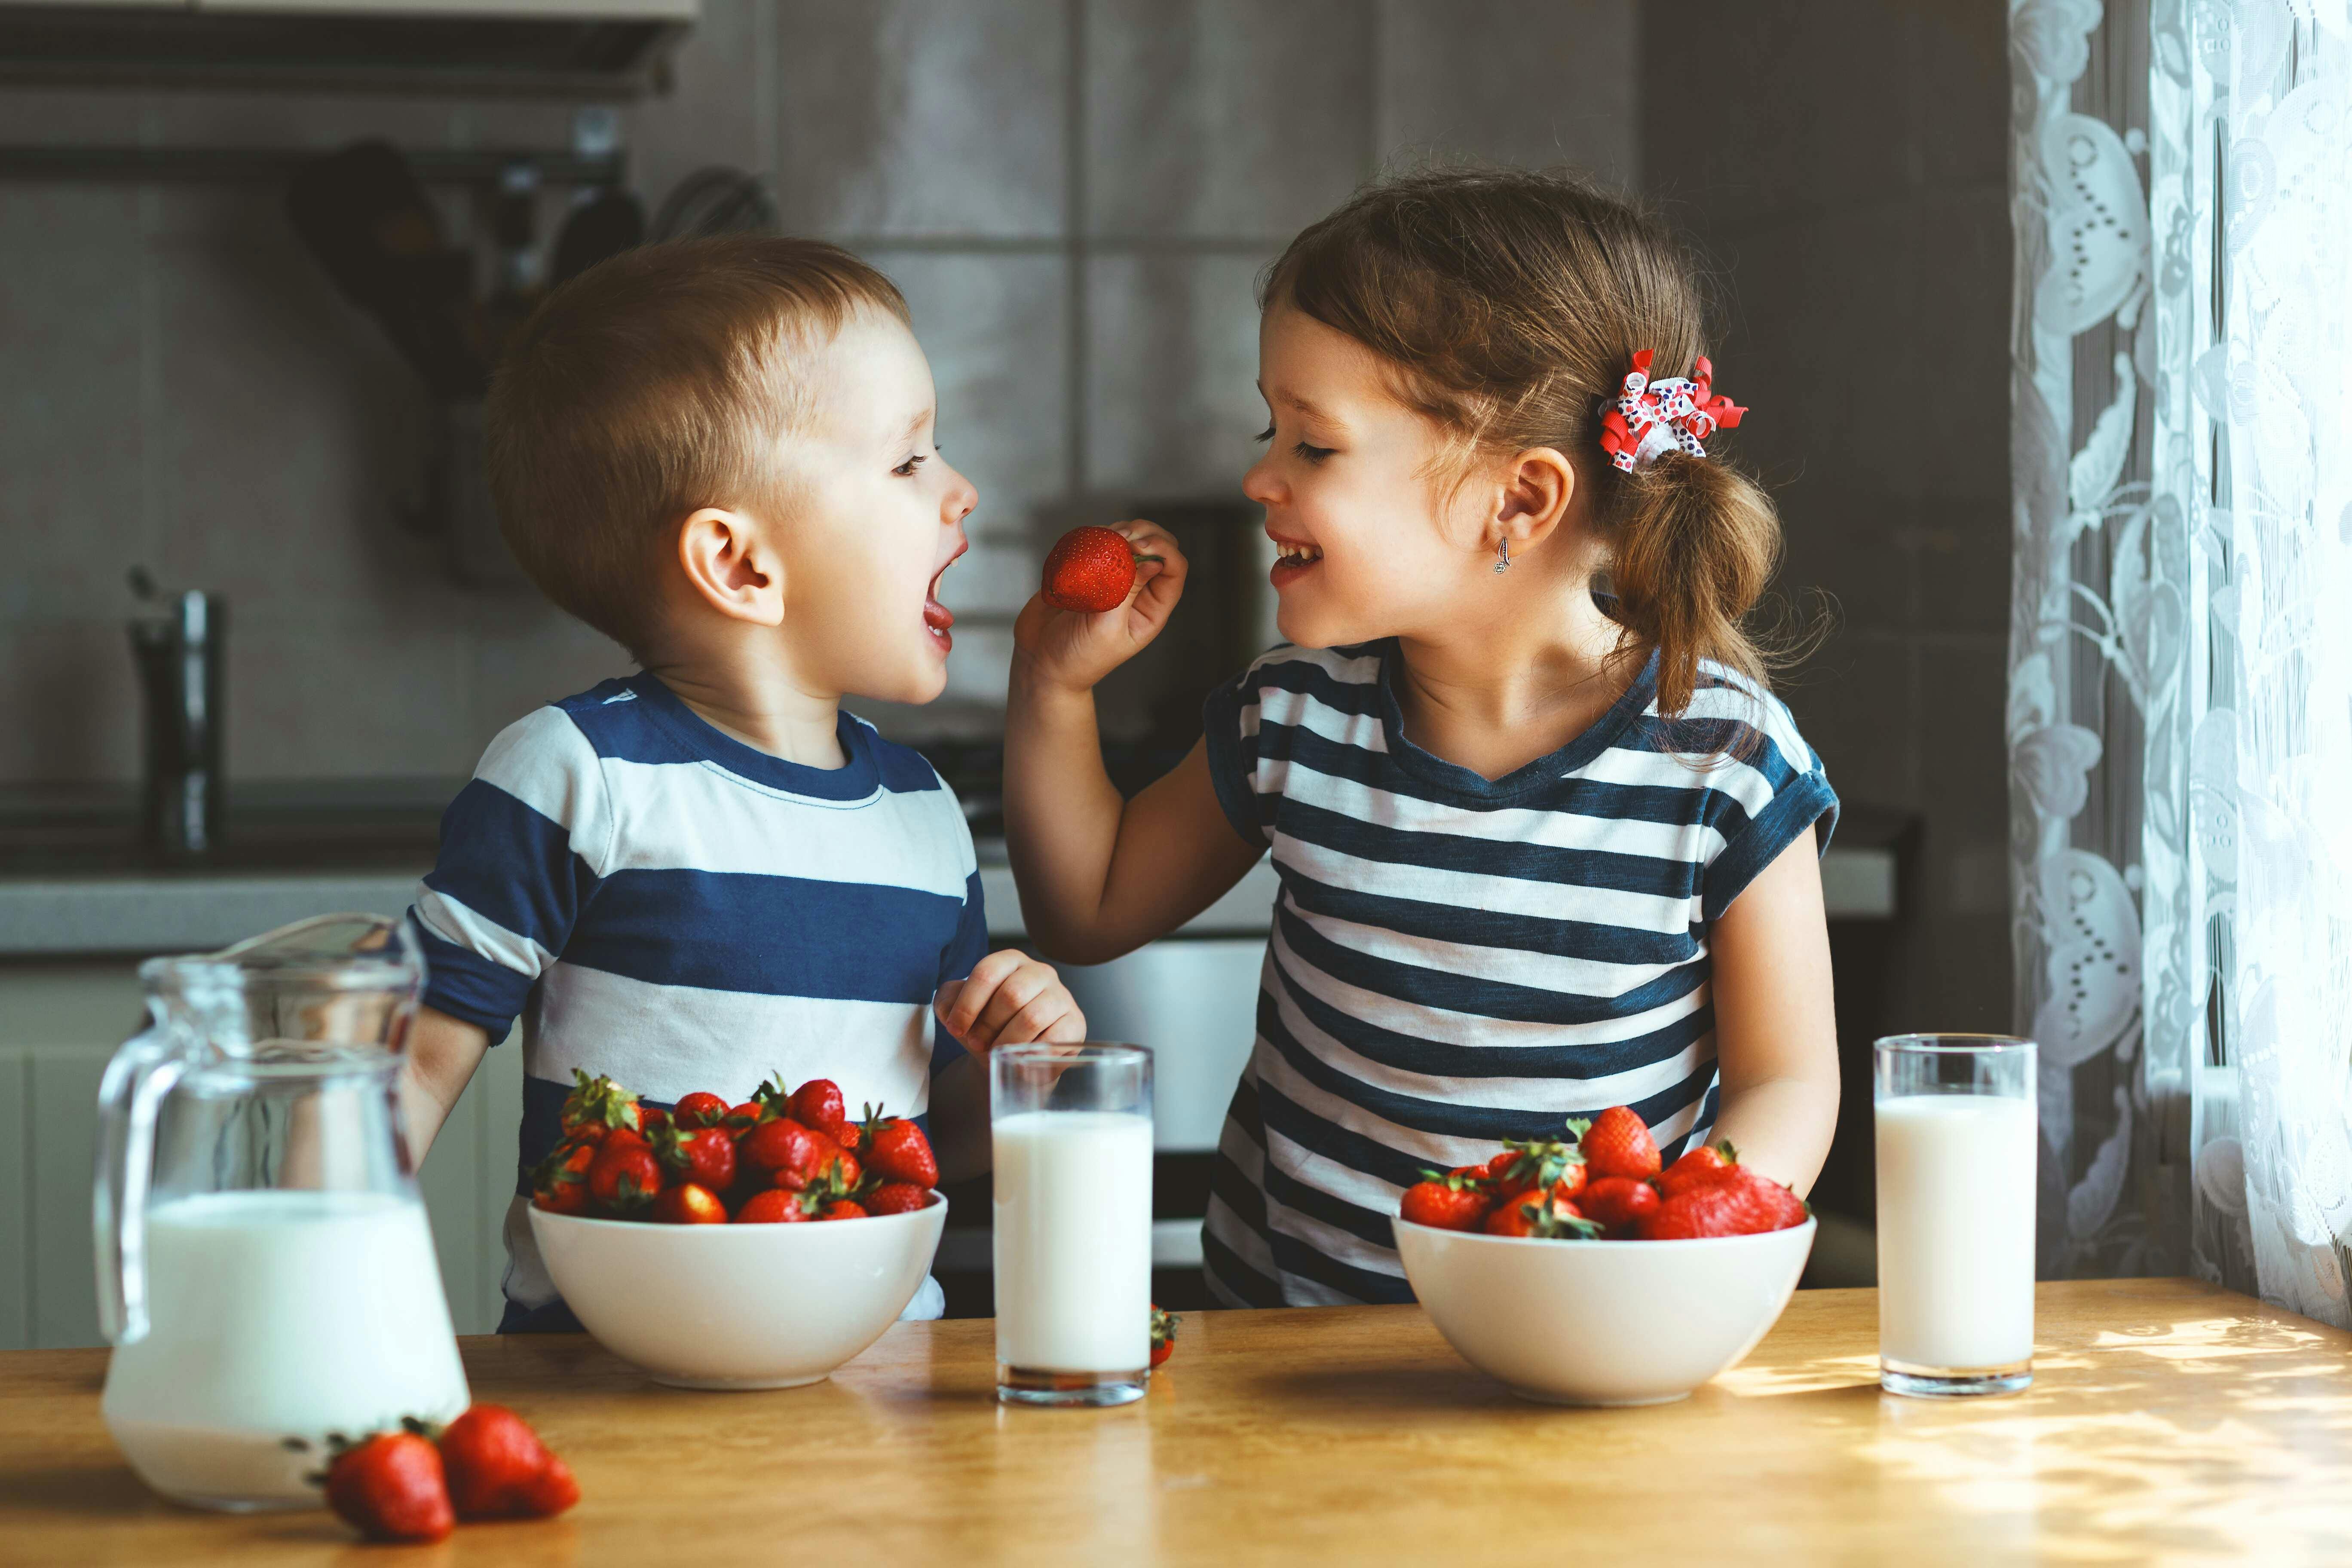 Two children are sitting at a table eating strawberries and drinking milk